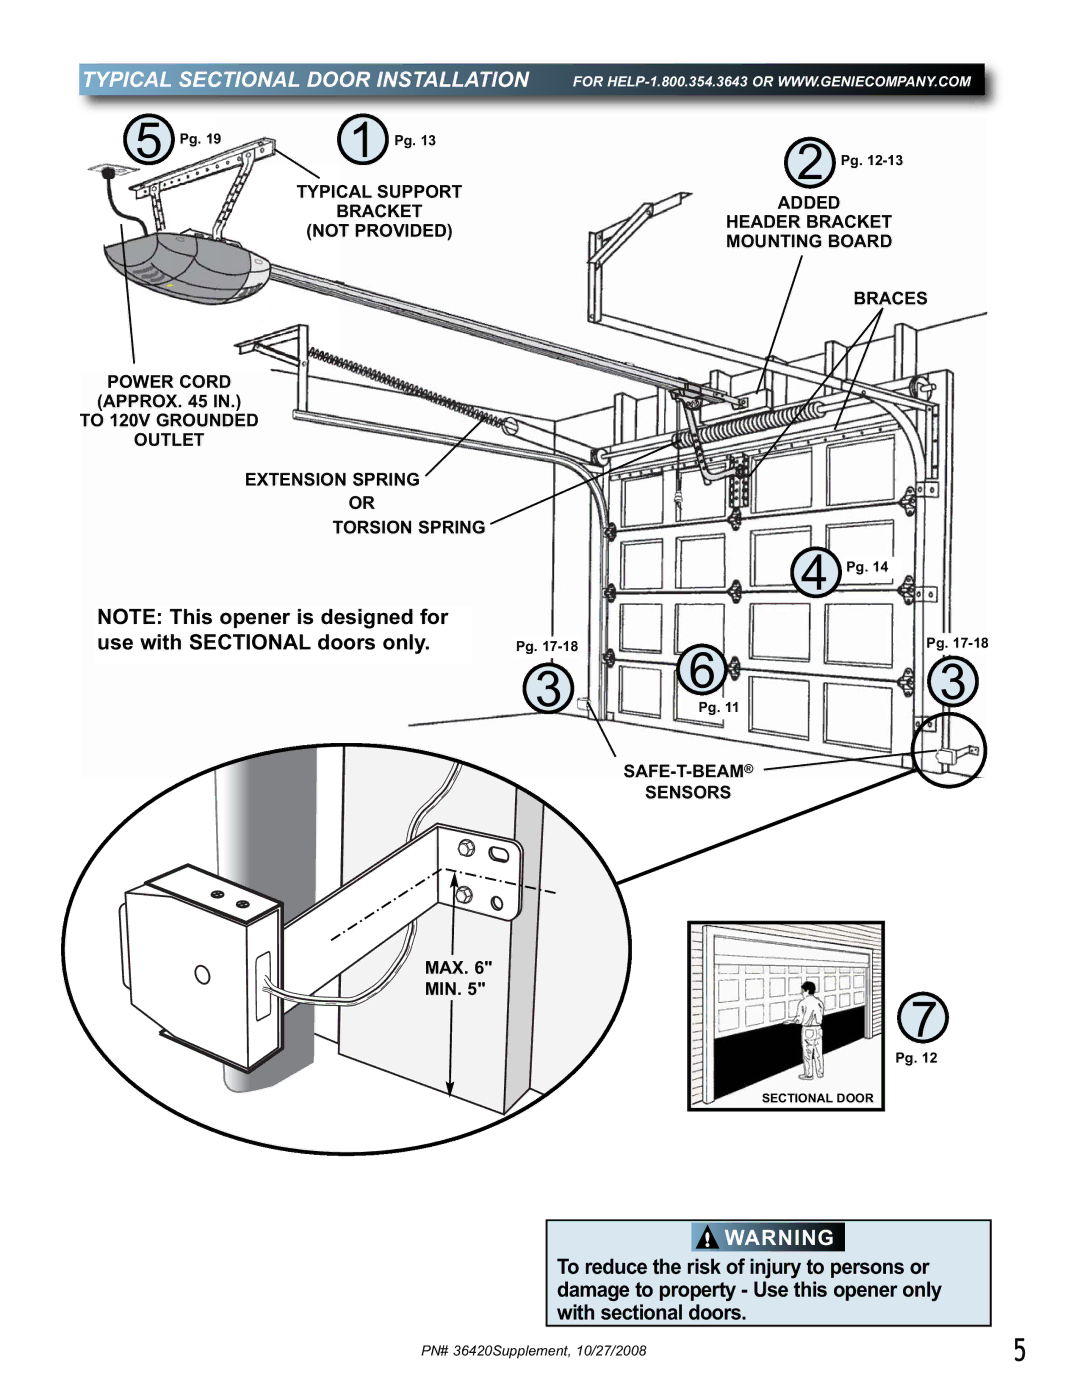 Genie 1042 manual Typical Sectional Door Installation, Pg Pg 